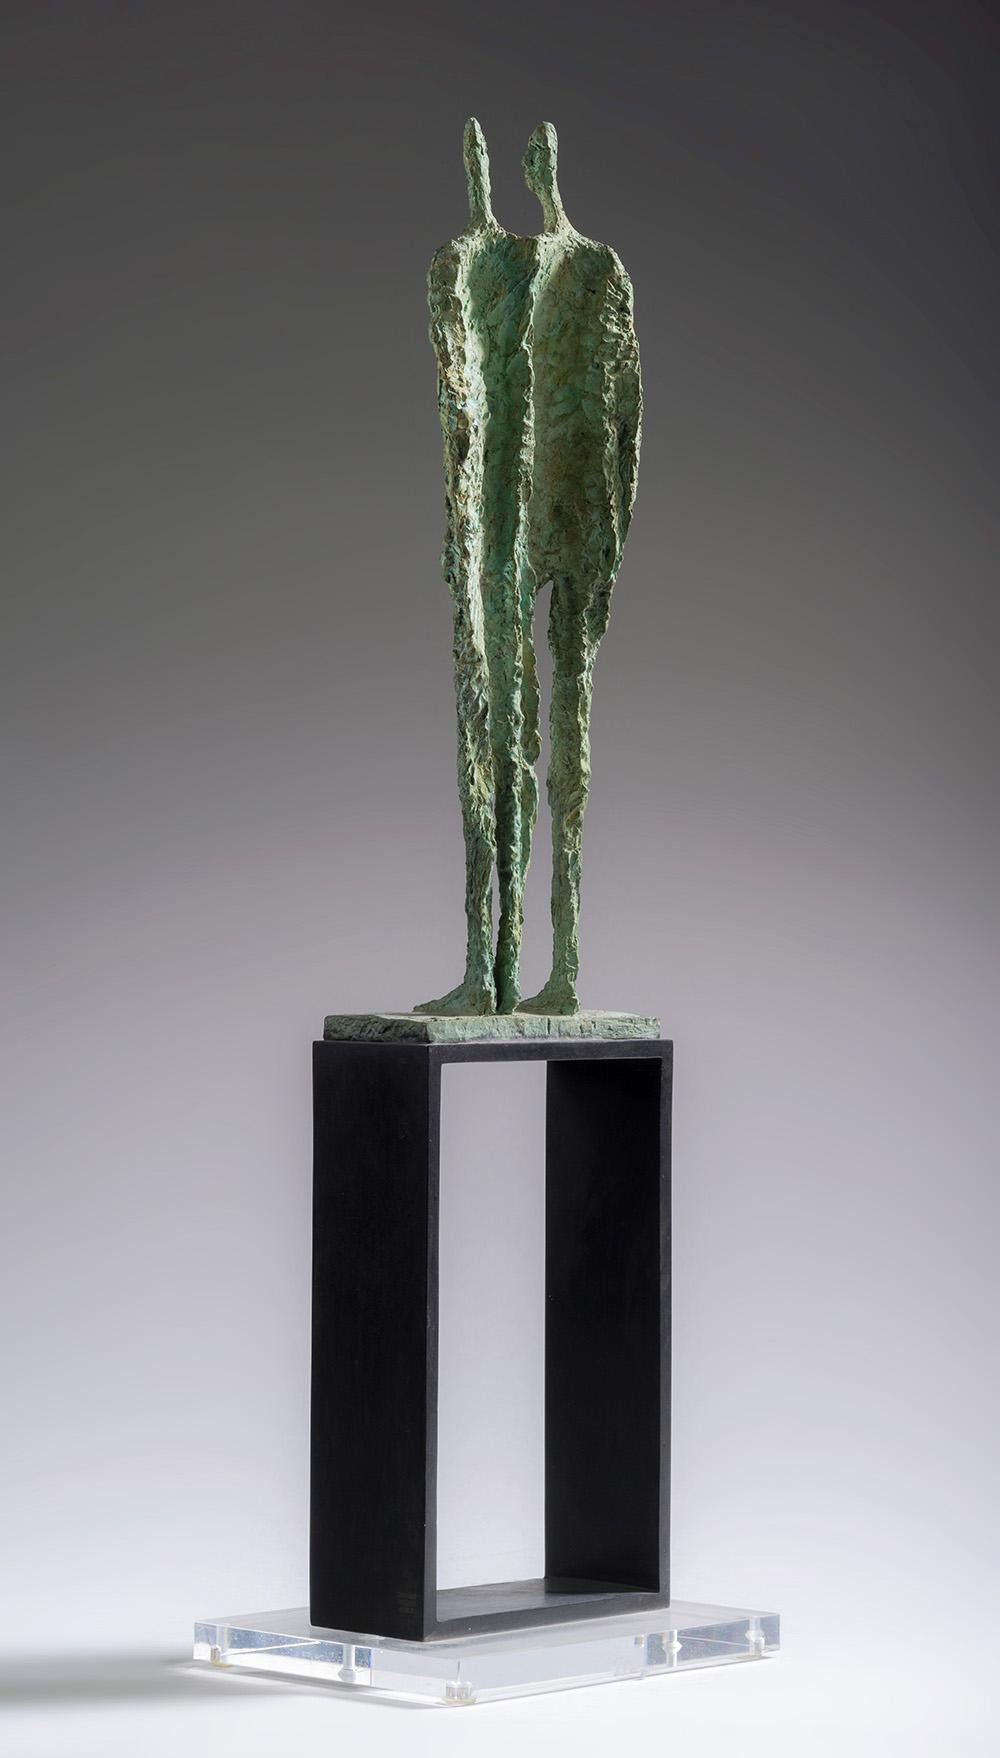 Thme is a bronze sculpture by sculptor Martine Demal, dimensions are 49 x 15 x 11.5 cm (19.3 × 5.9 × 4.5 in). The sculpture is sold with a plexiglas base which dimensions are 15 x 11.5 x 1 cm (5.9 x 4.3 x 0.4 in). 
The sculpture is part of an